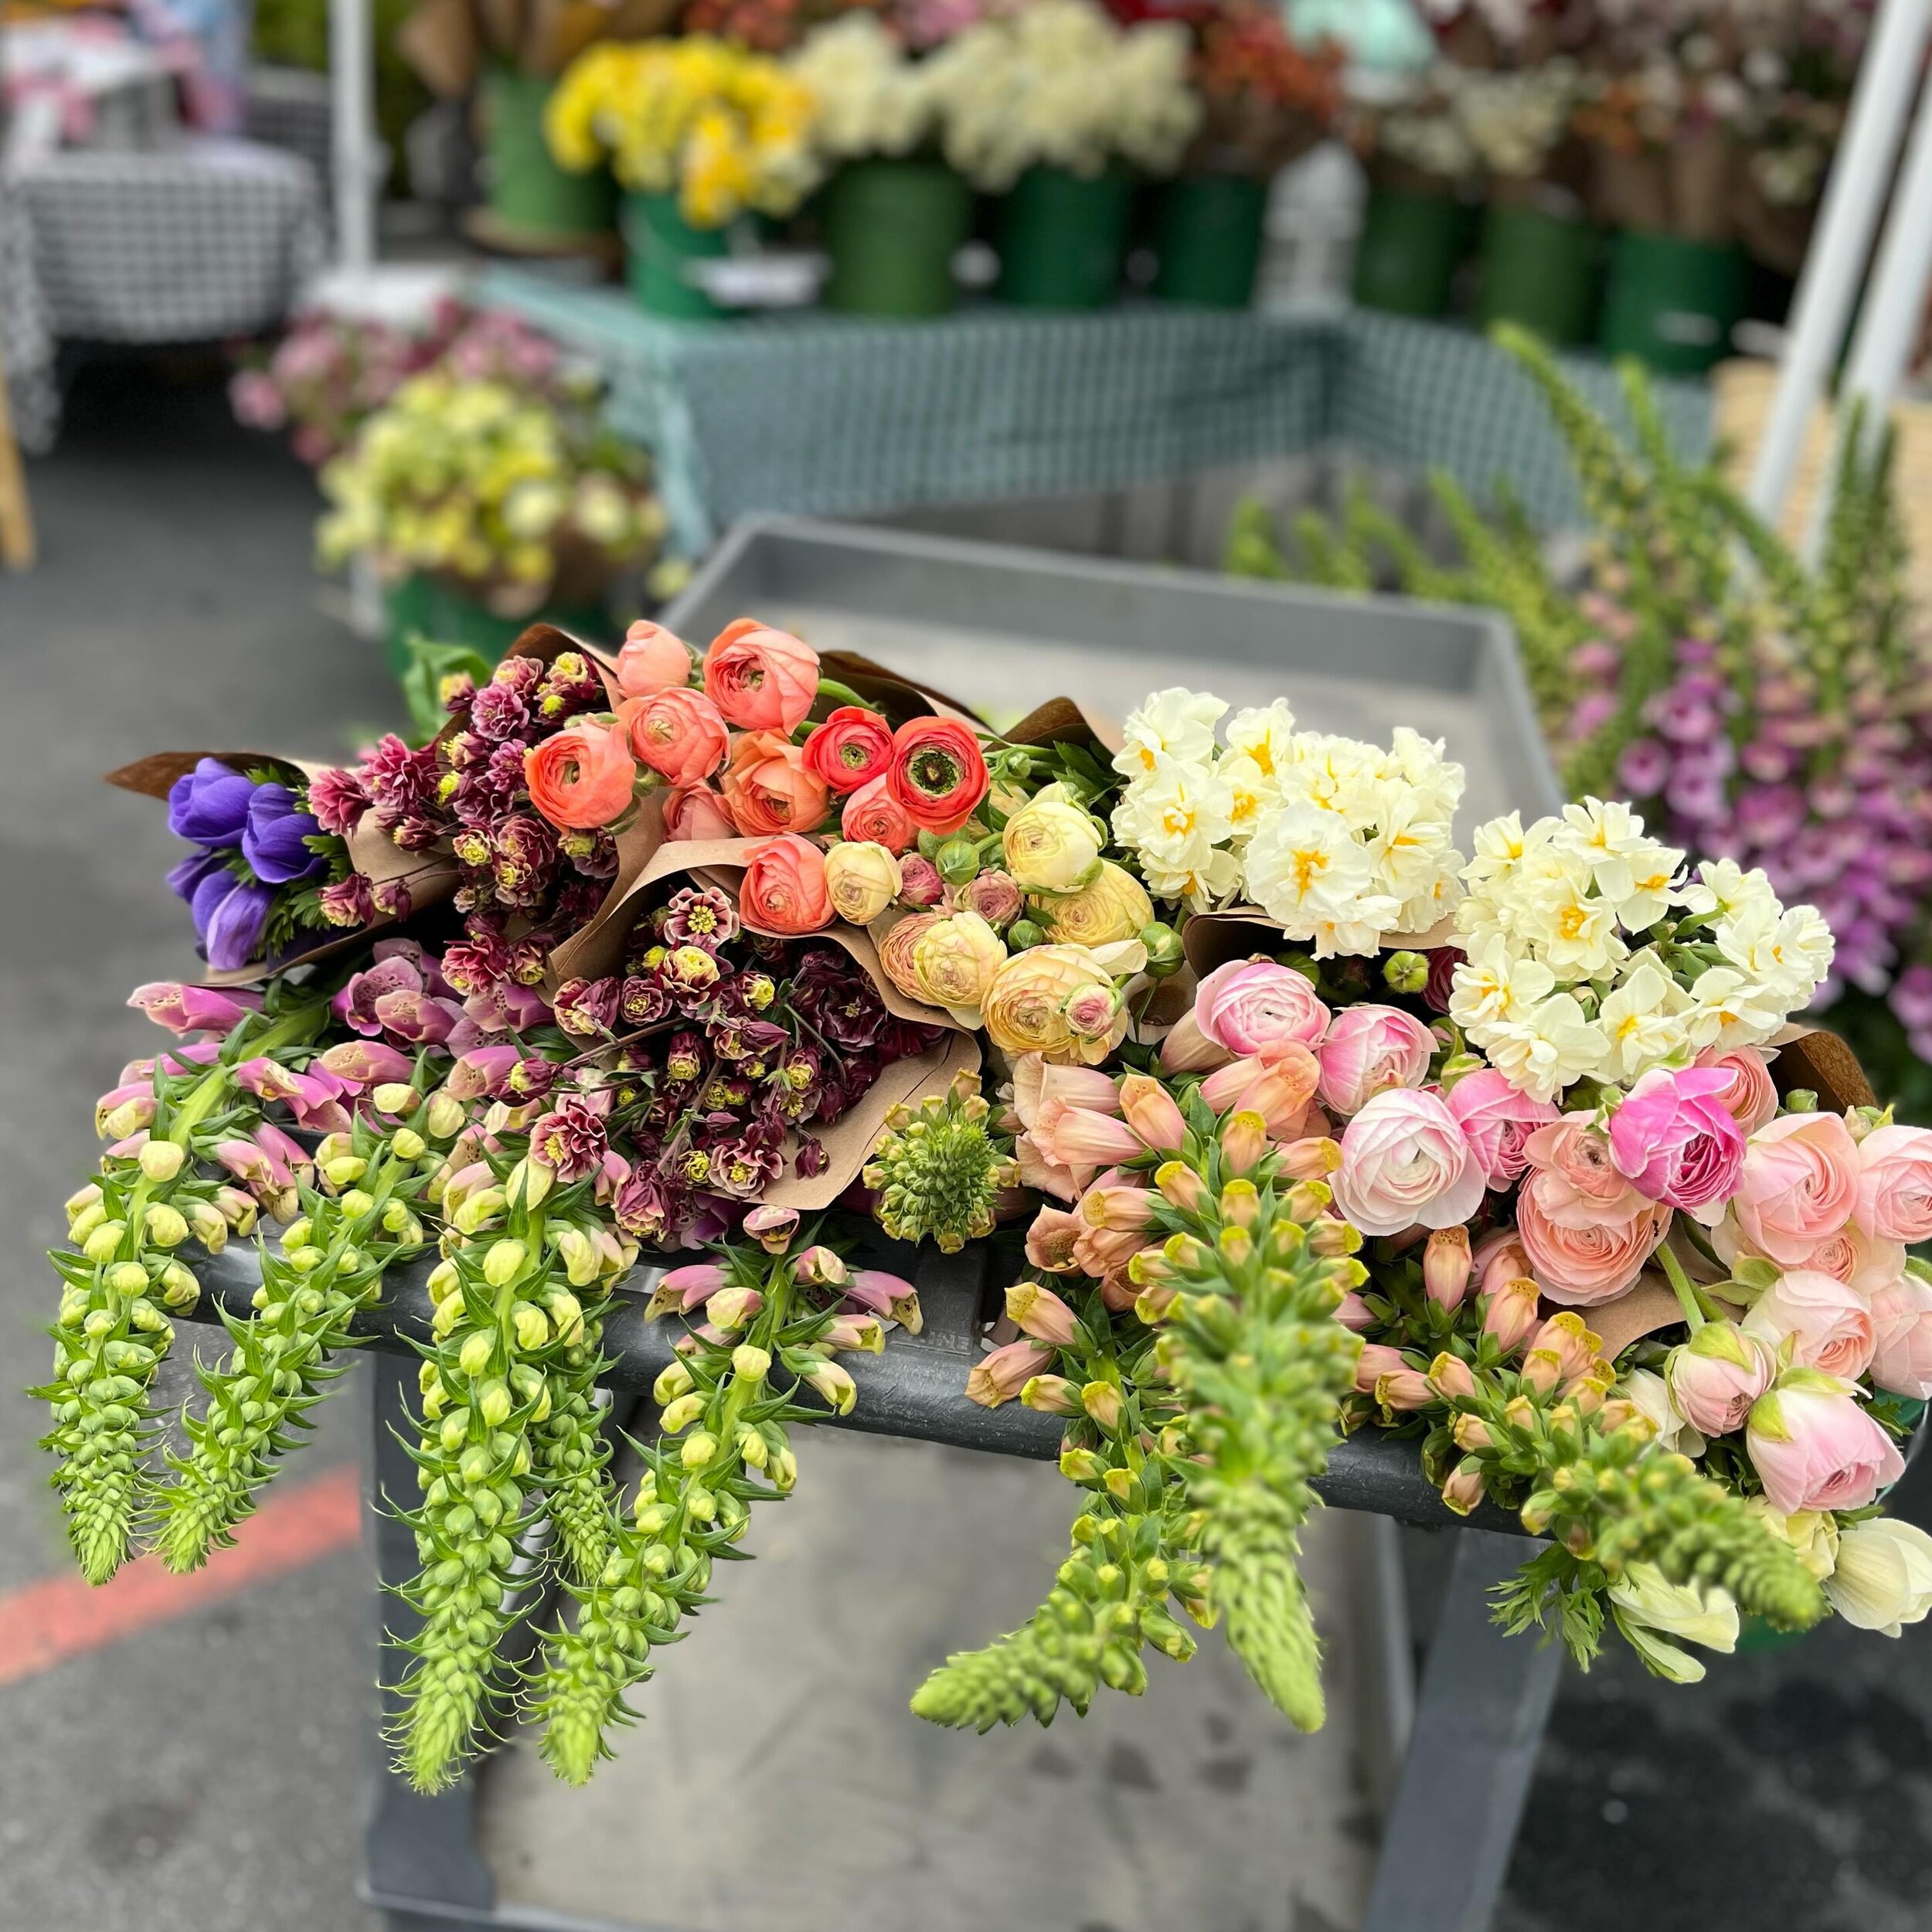 Our buy from @frontporchfarmer at the @aginstituteofmarin this morning is just blowing me away! monster sized foxglove, cute little columbine, fluffy narcissus, ranunculus and anemones. Spring has definitely sprung!!!

#markethallfoods #rockridgemark